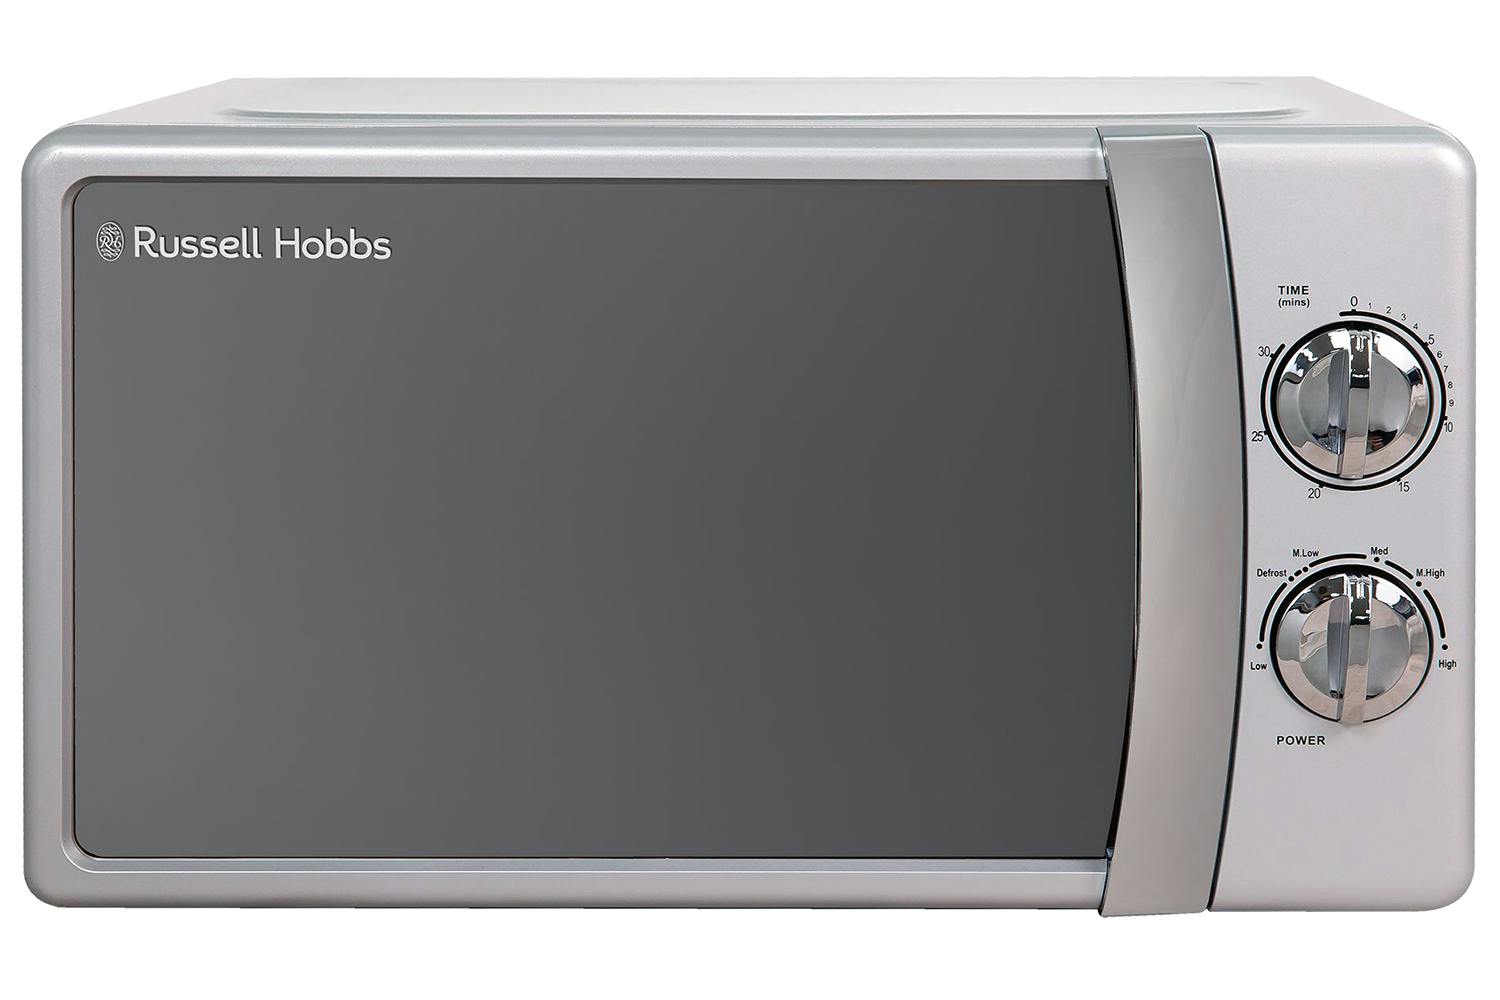 Russell Hobbs 17L 700W Freestanding Solo Microwave | RHMM701S | Silver